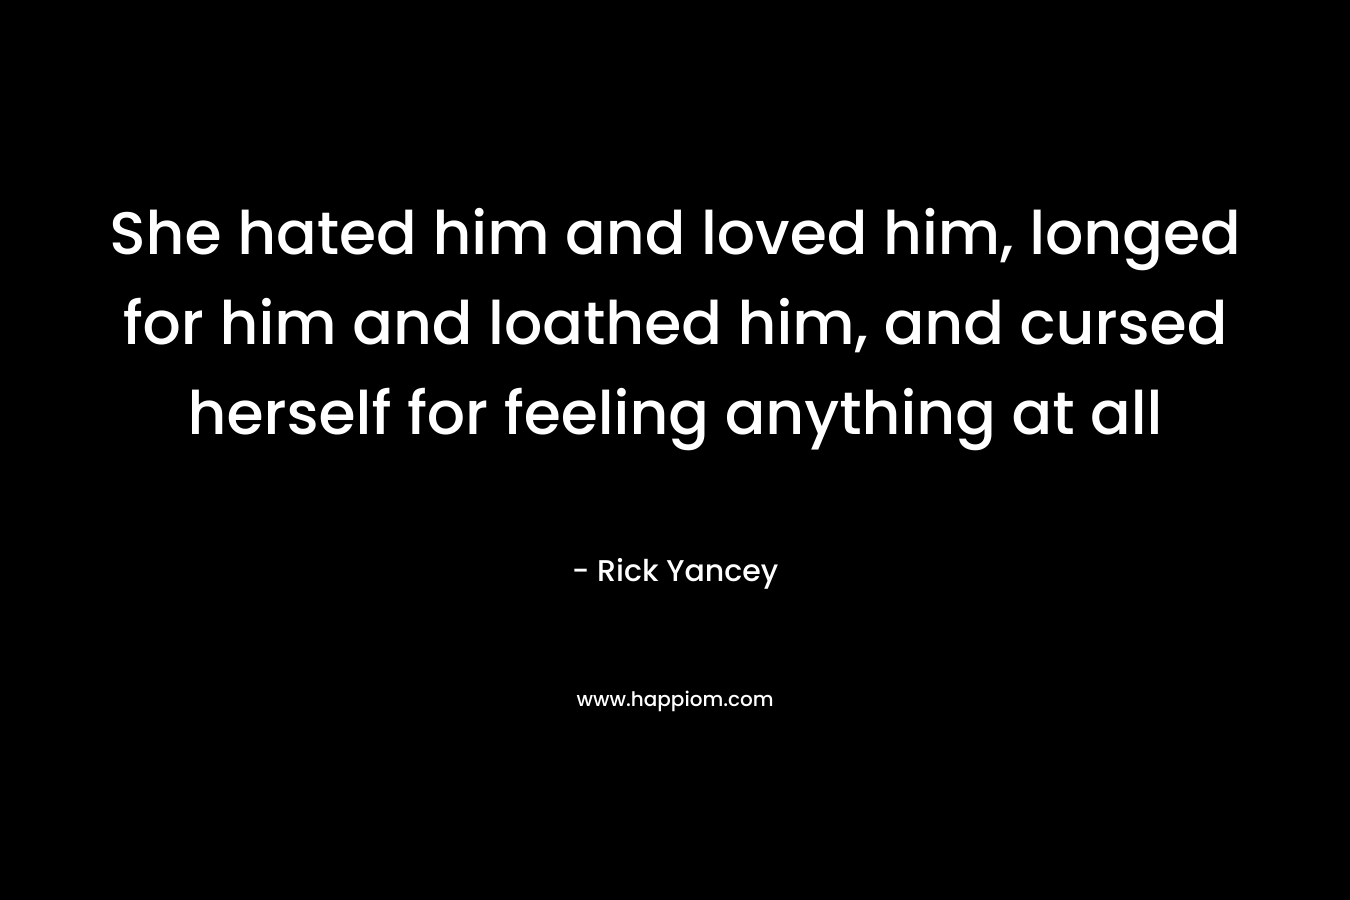 She hated him and loved him, longed for him and loathed him, and cursed herself for feeling anything at all – Rick Yancey